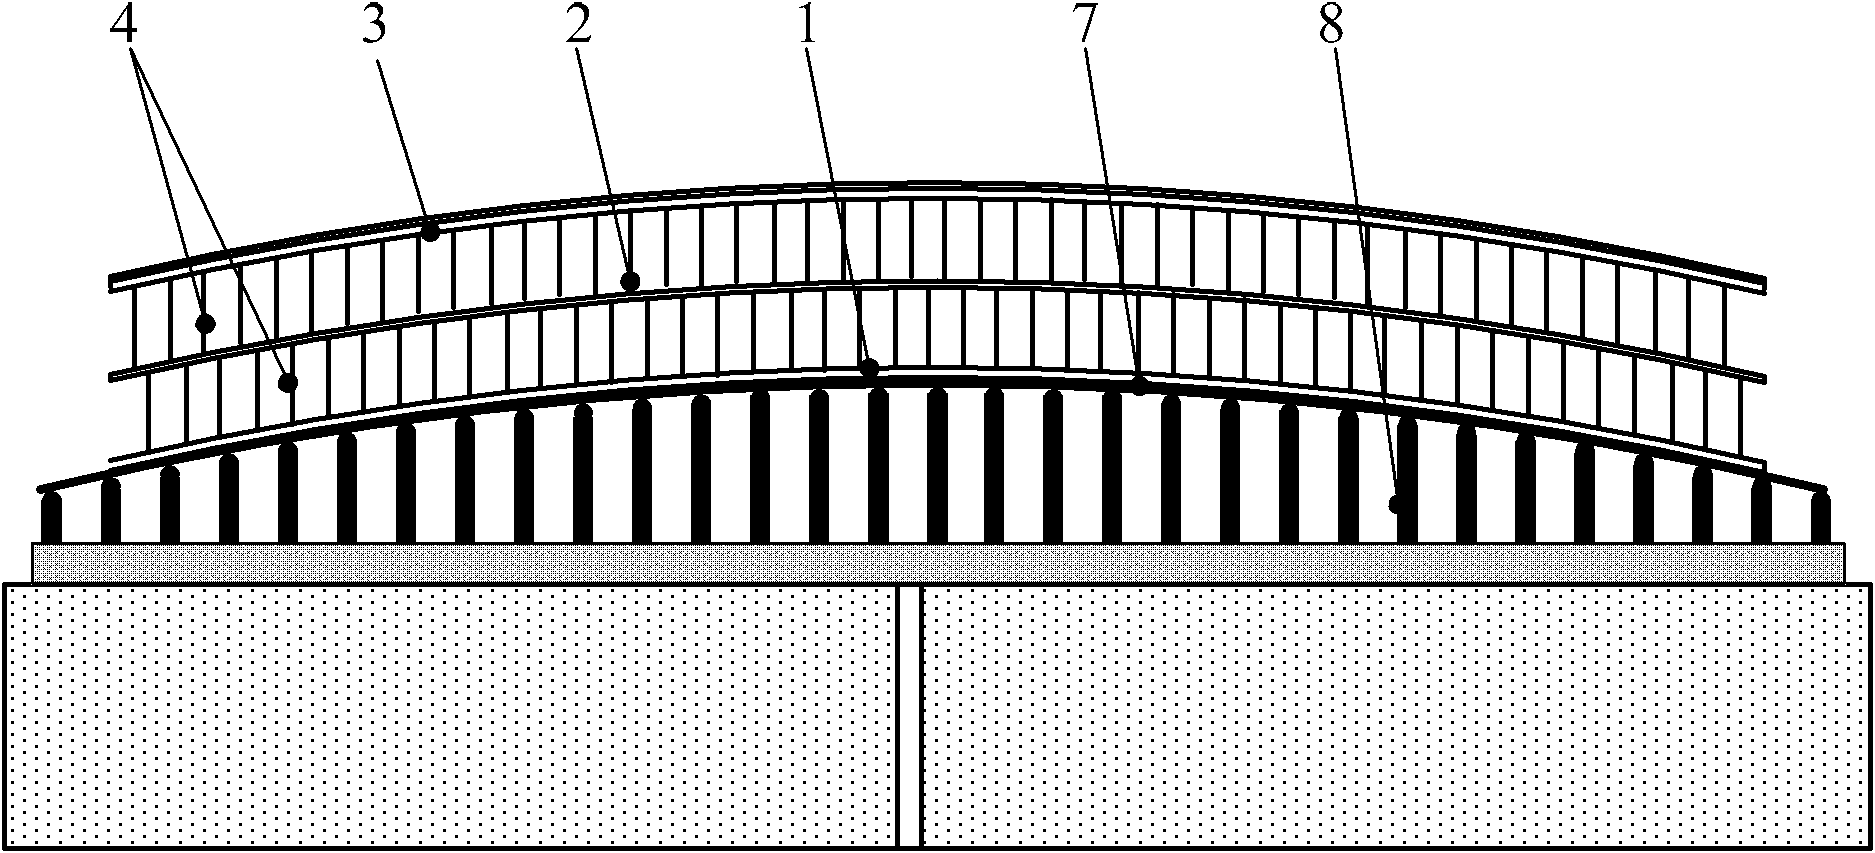 Splicing method for reflection panel in honeycomb sandwich structure